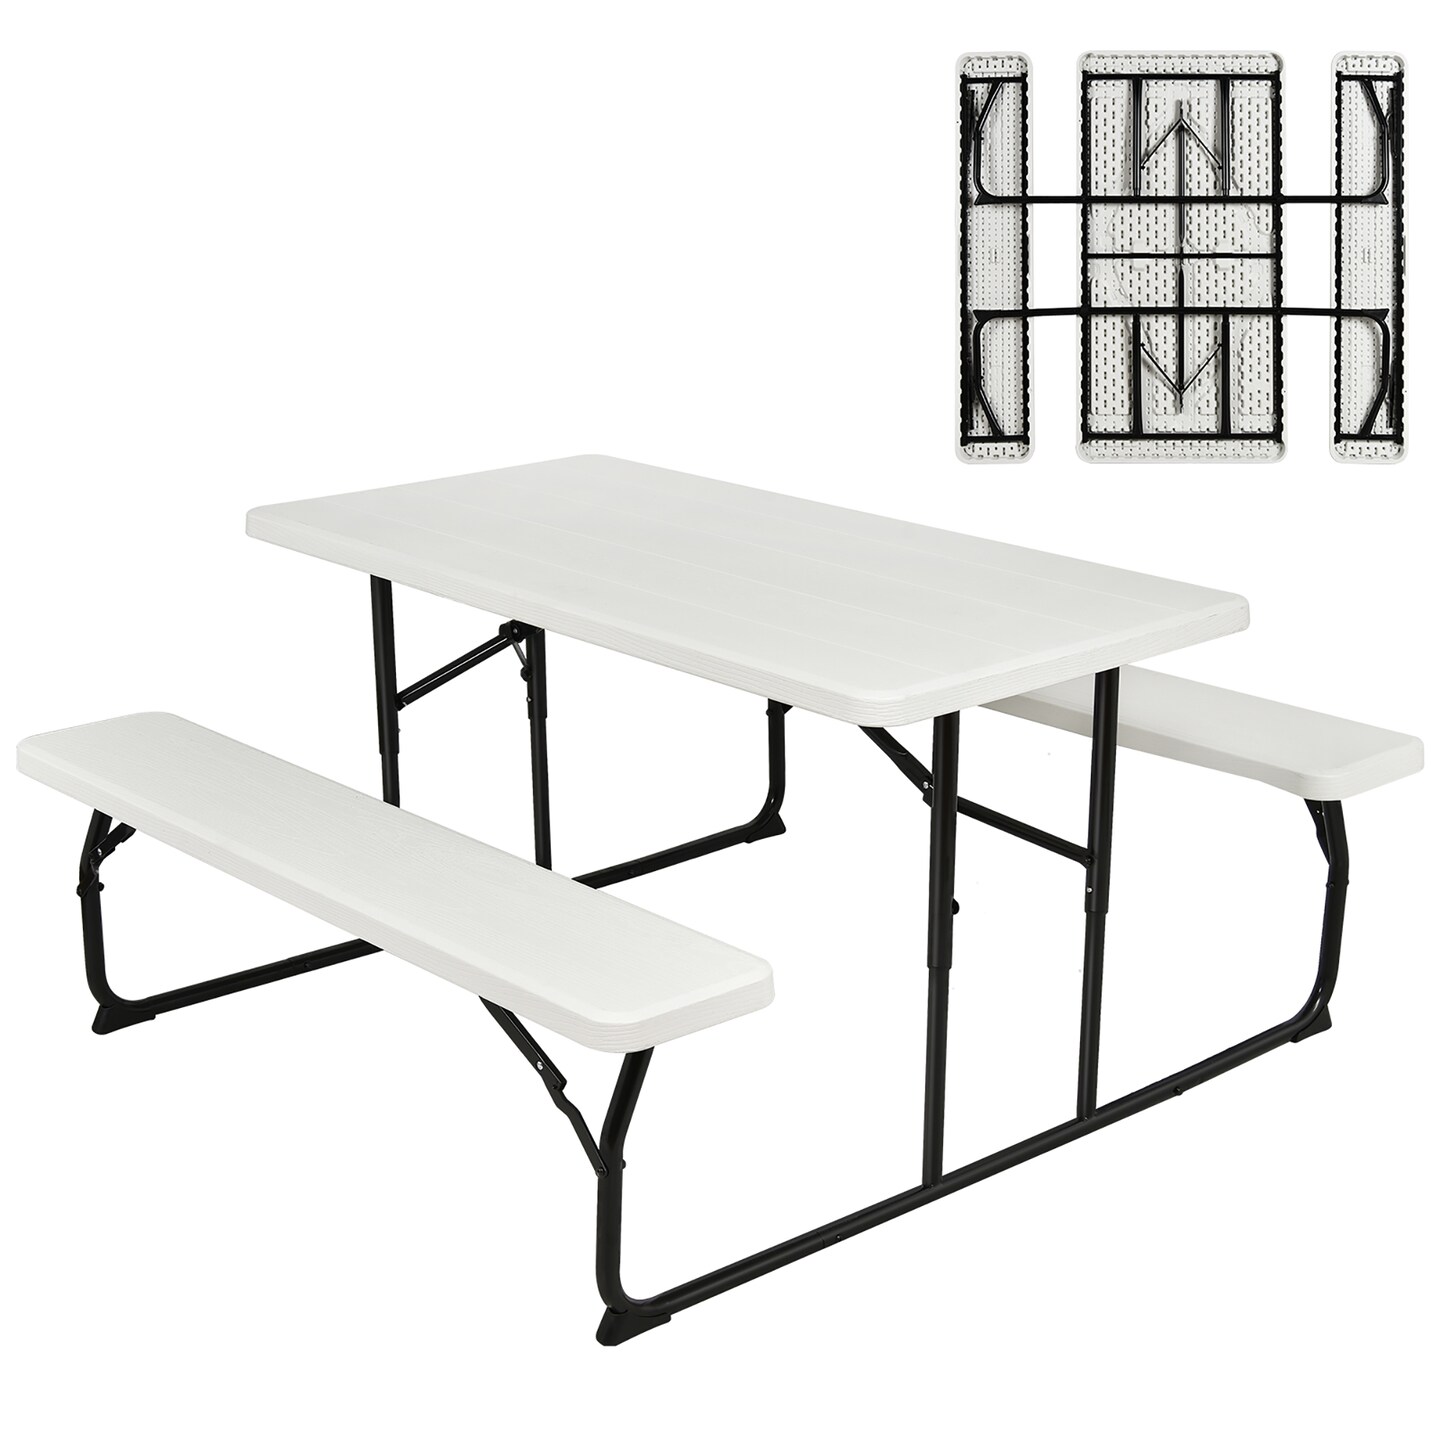 Costway Folding Picnic Table & Bench Set for Camping BBQ w/ Steel Frame White/Balck